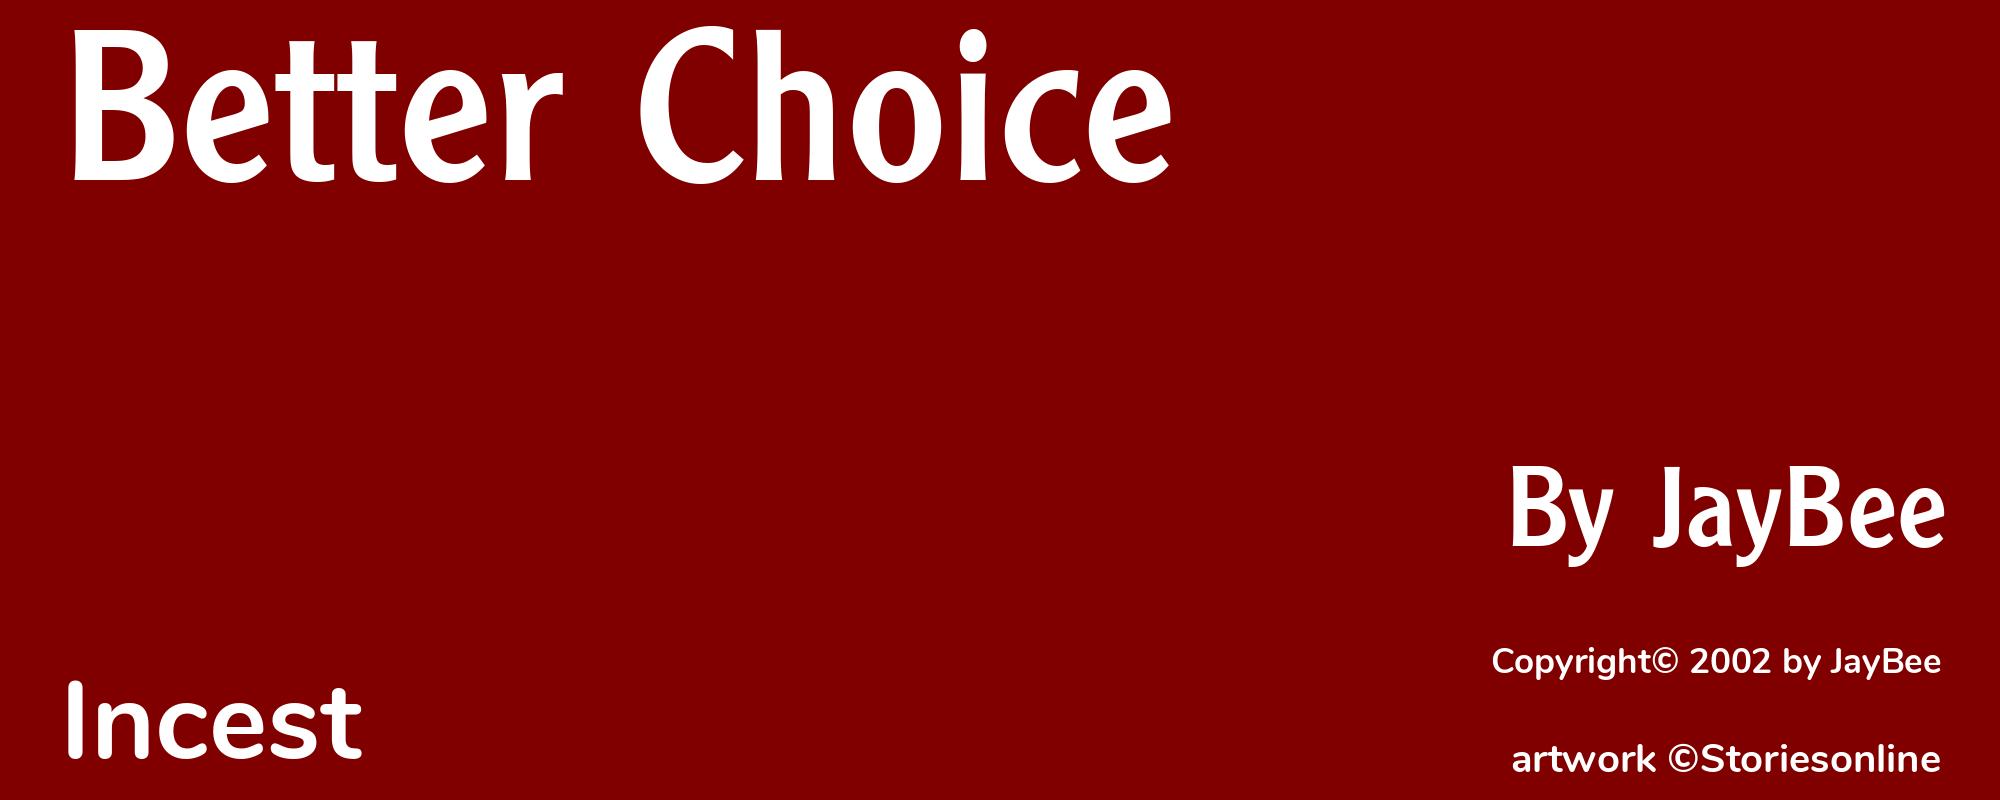 Better Choice - Cover